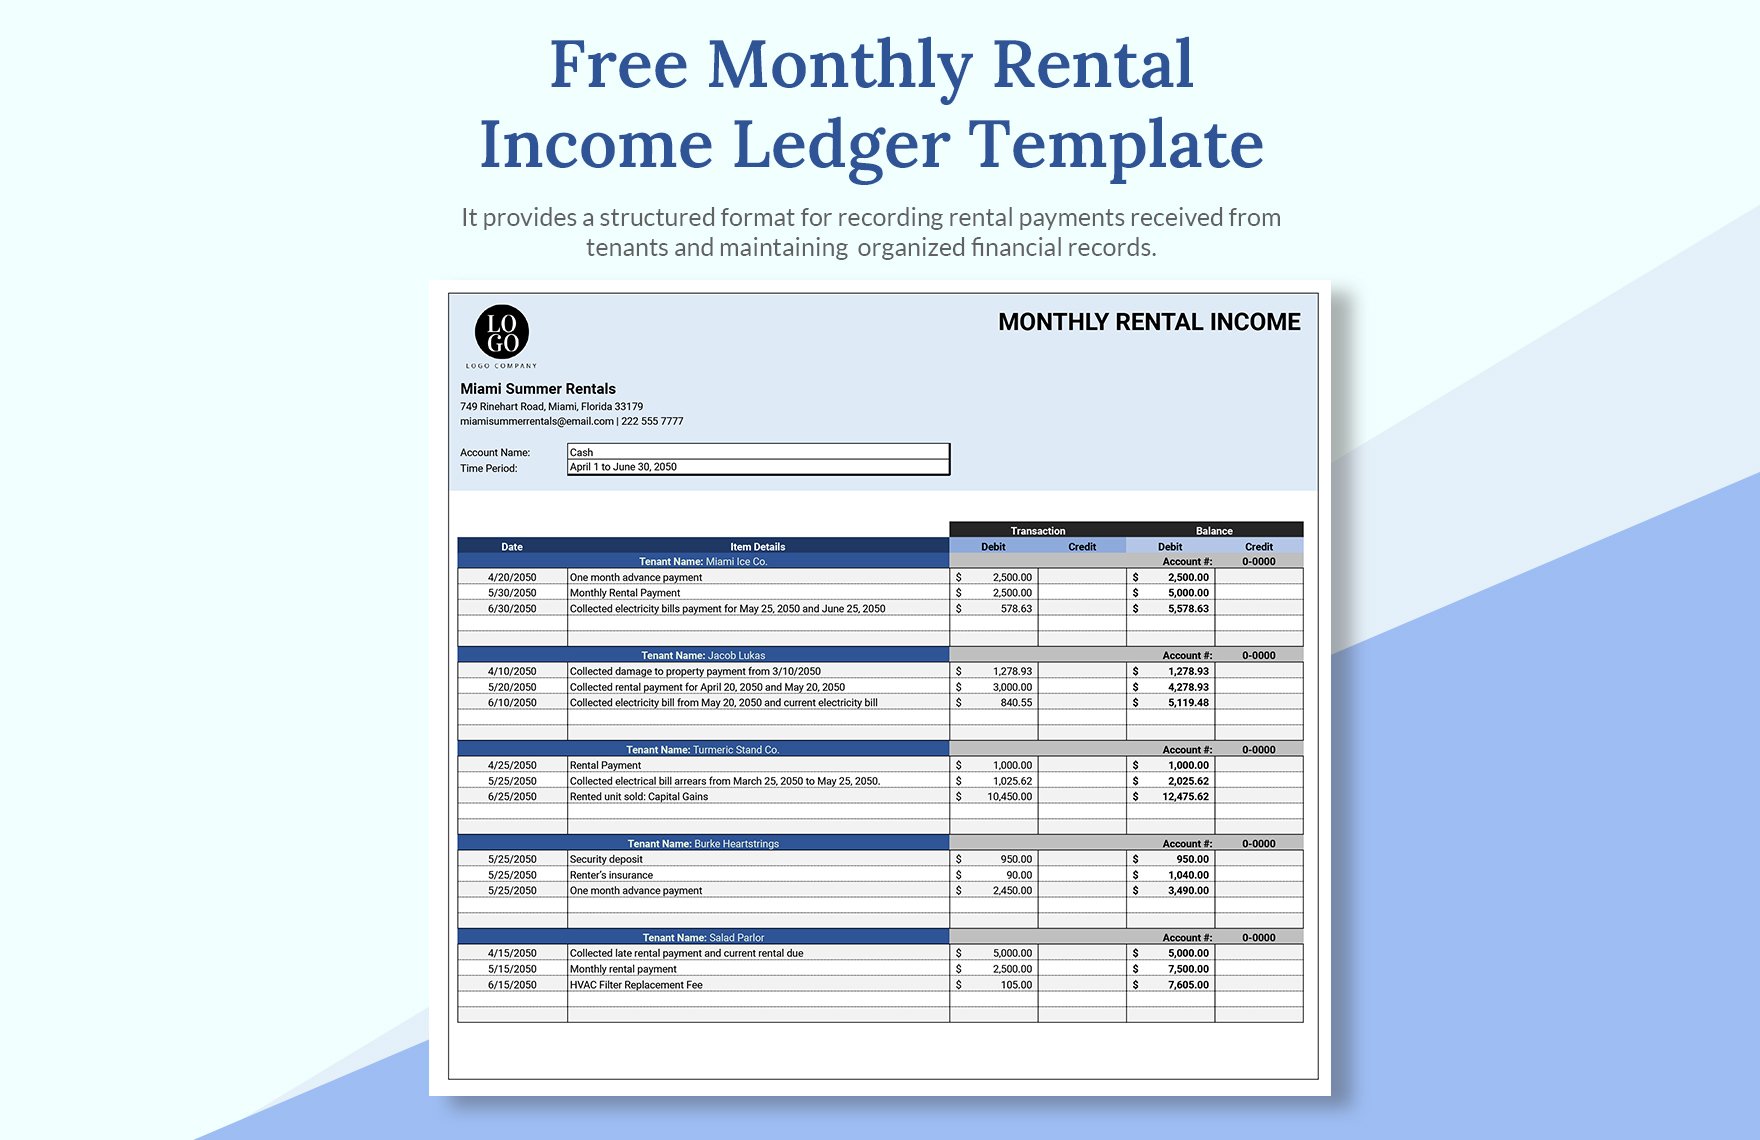 Monthly Rental Income Ledger Template in Excel, Google Sheets